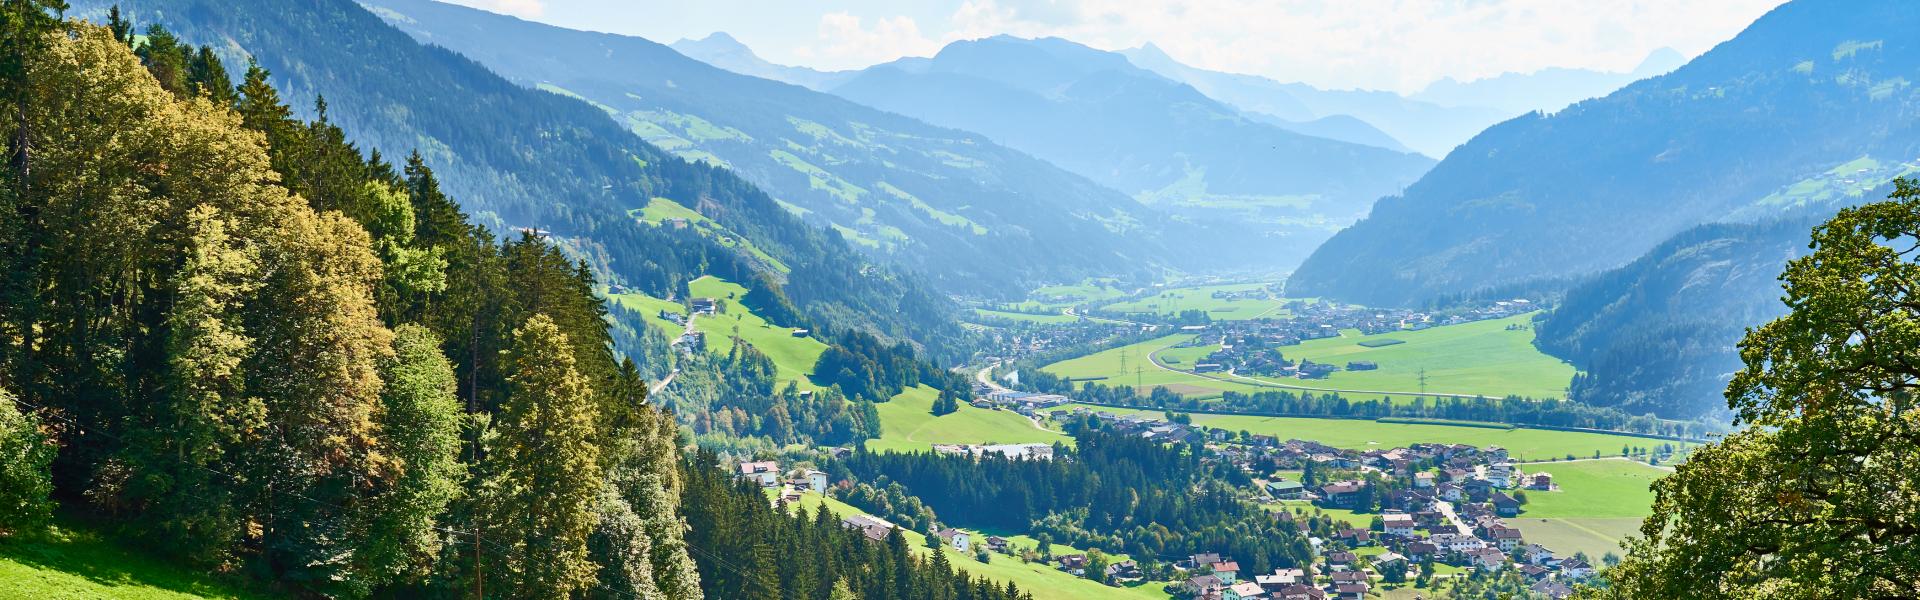 Find the ideal holiday home in Tyrol for your Austrian adventure - Casamundo